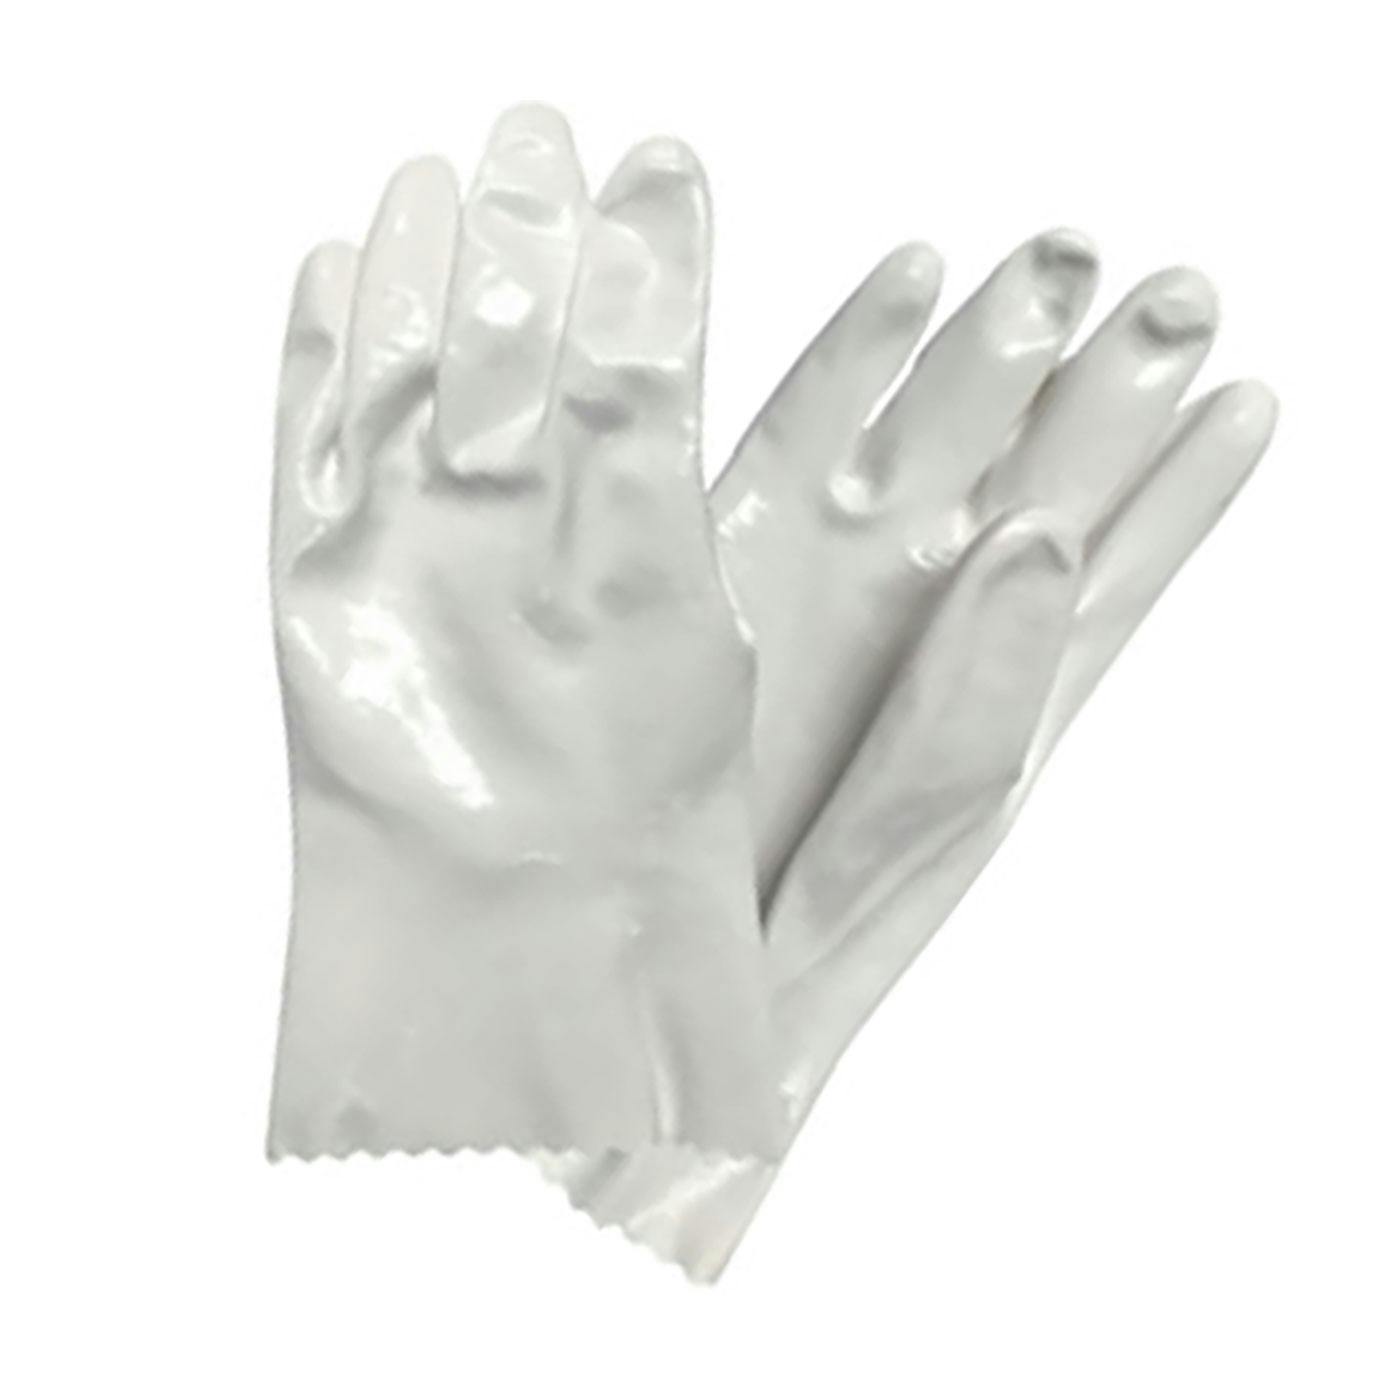 Polyurethane Solvent Glove with Cotton Lining - 13", White (550) - L